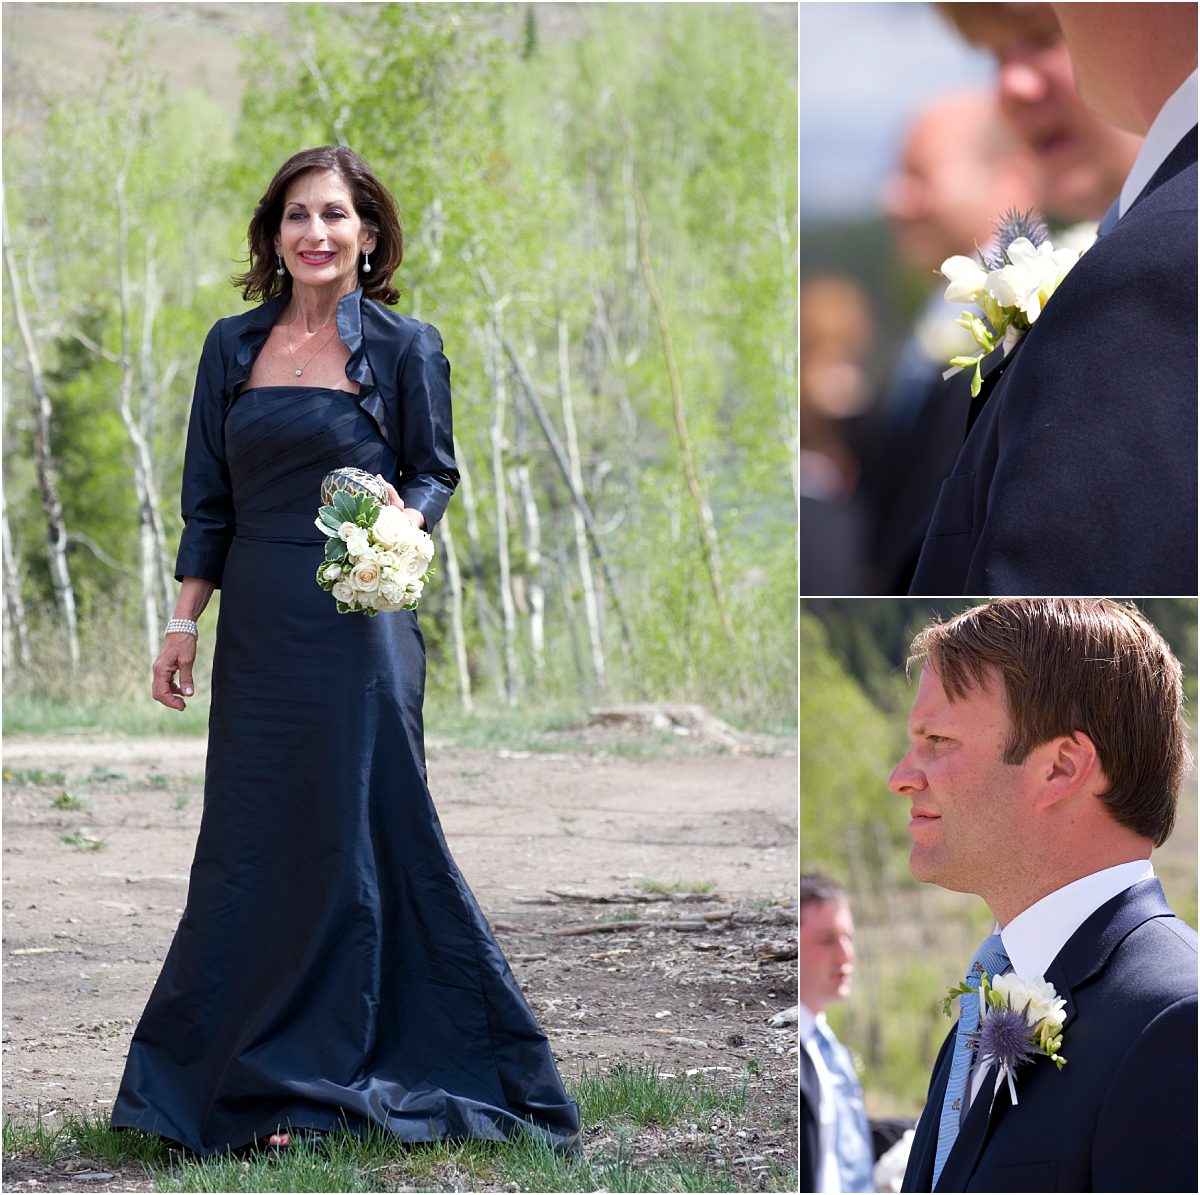 processional, navy gown, navy tuxes, outdoor ceremony at Woodsie, C Lazy U Ranch Wedding, Granby, Colorado Wedding Photographer, Mountain Wedding Photography